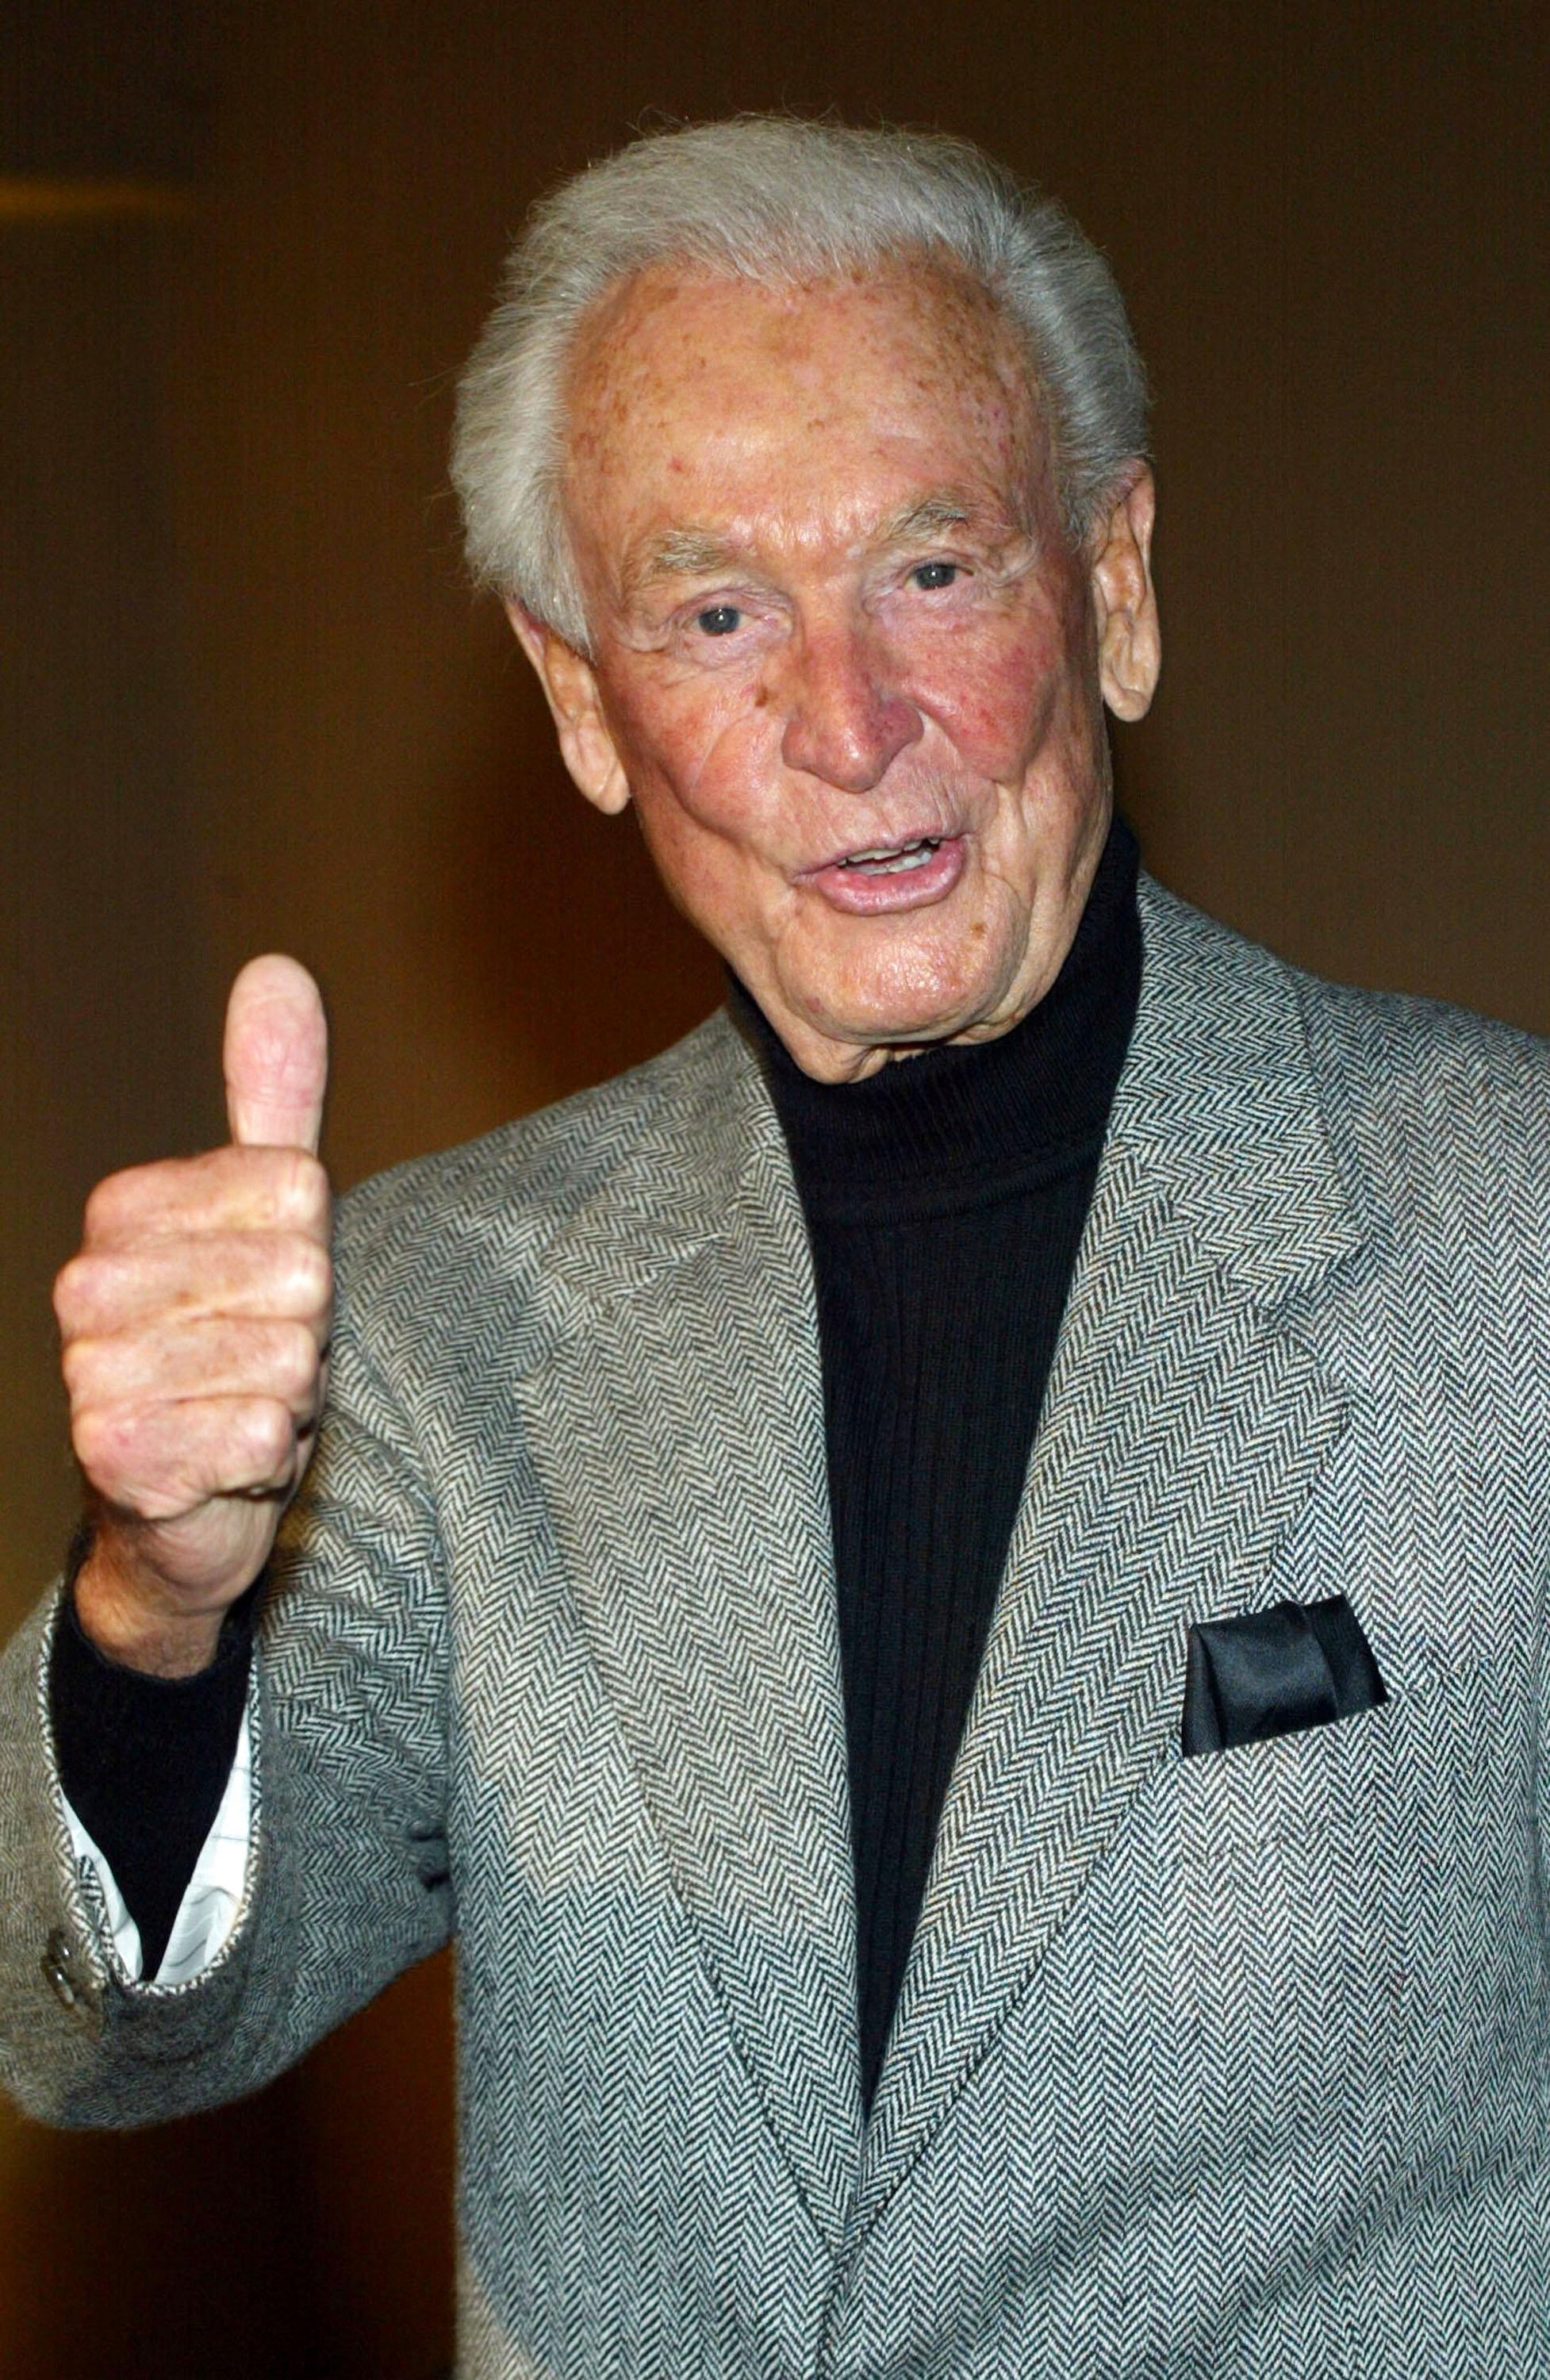 Television game show host Bob Barker attends the CBS/UPN's Super Bowl XXXVIII Party during the 2004 Winter Press Tour at the Avalon Hollywood on January 17, 2004 in Hollywood, California. | Source: Getty Images